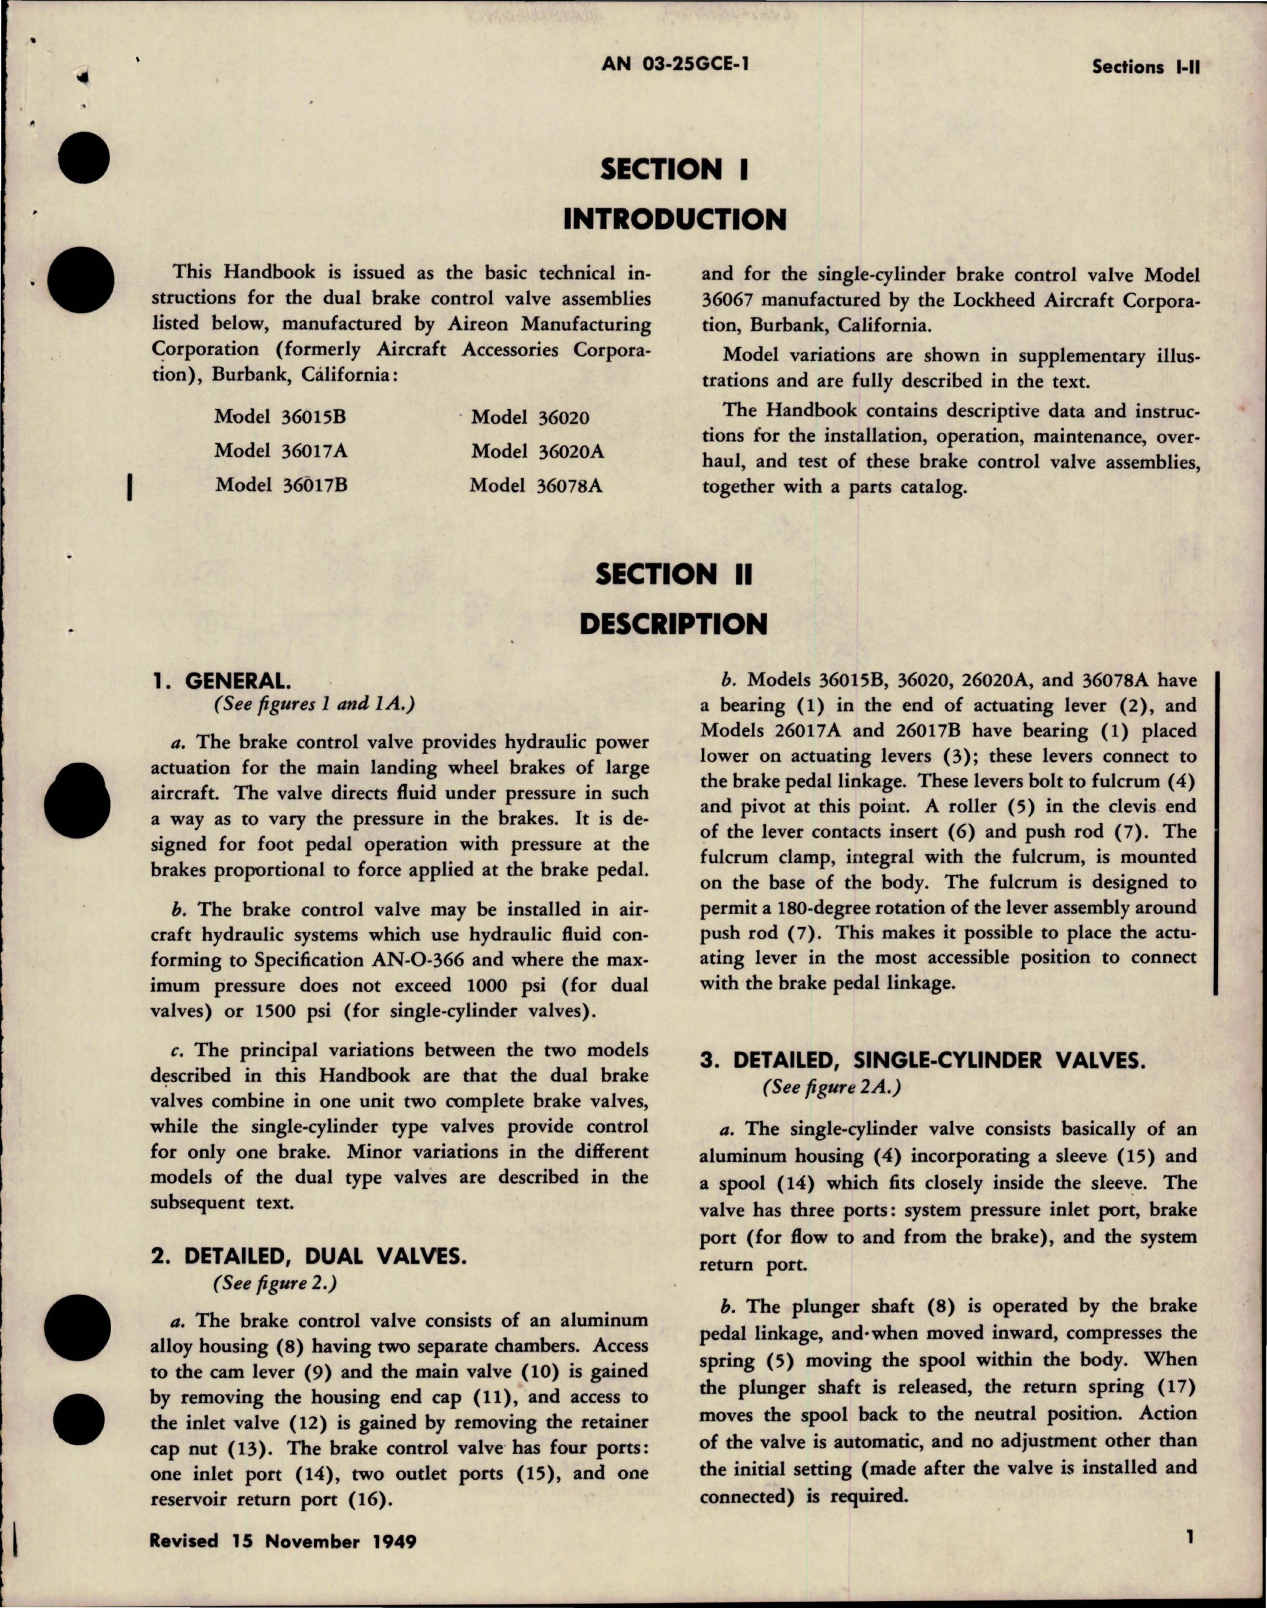 Sample page 7 from AirCorps Library document: Operation, Service, Overhaul Instructions with Parts Catalog for Brake Control Valves